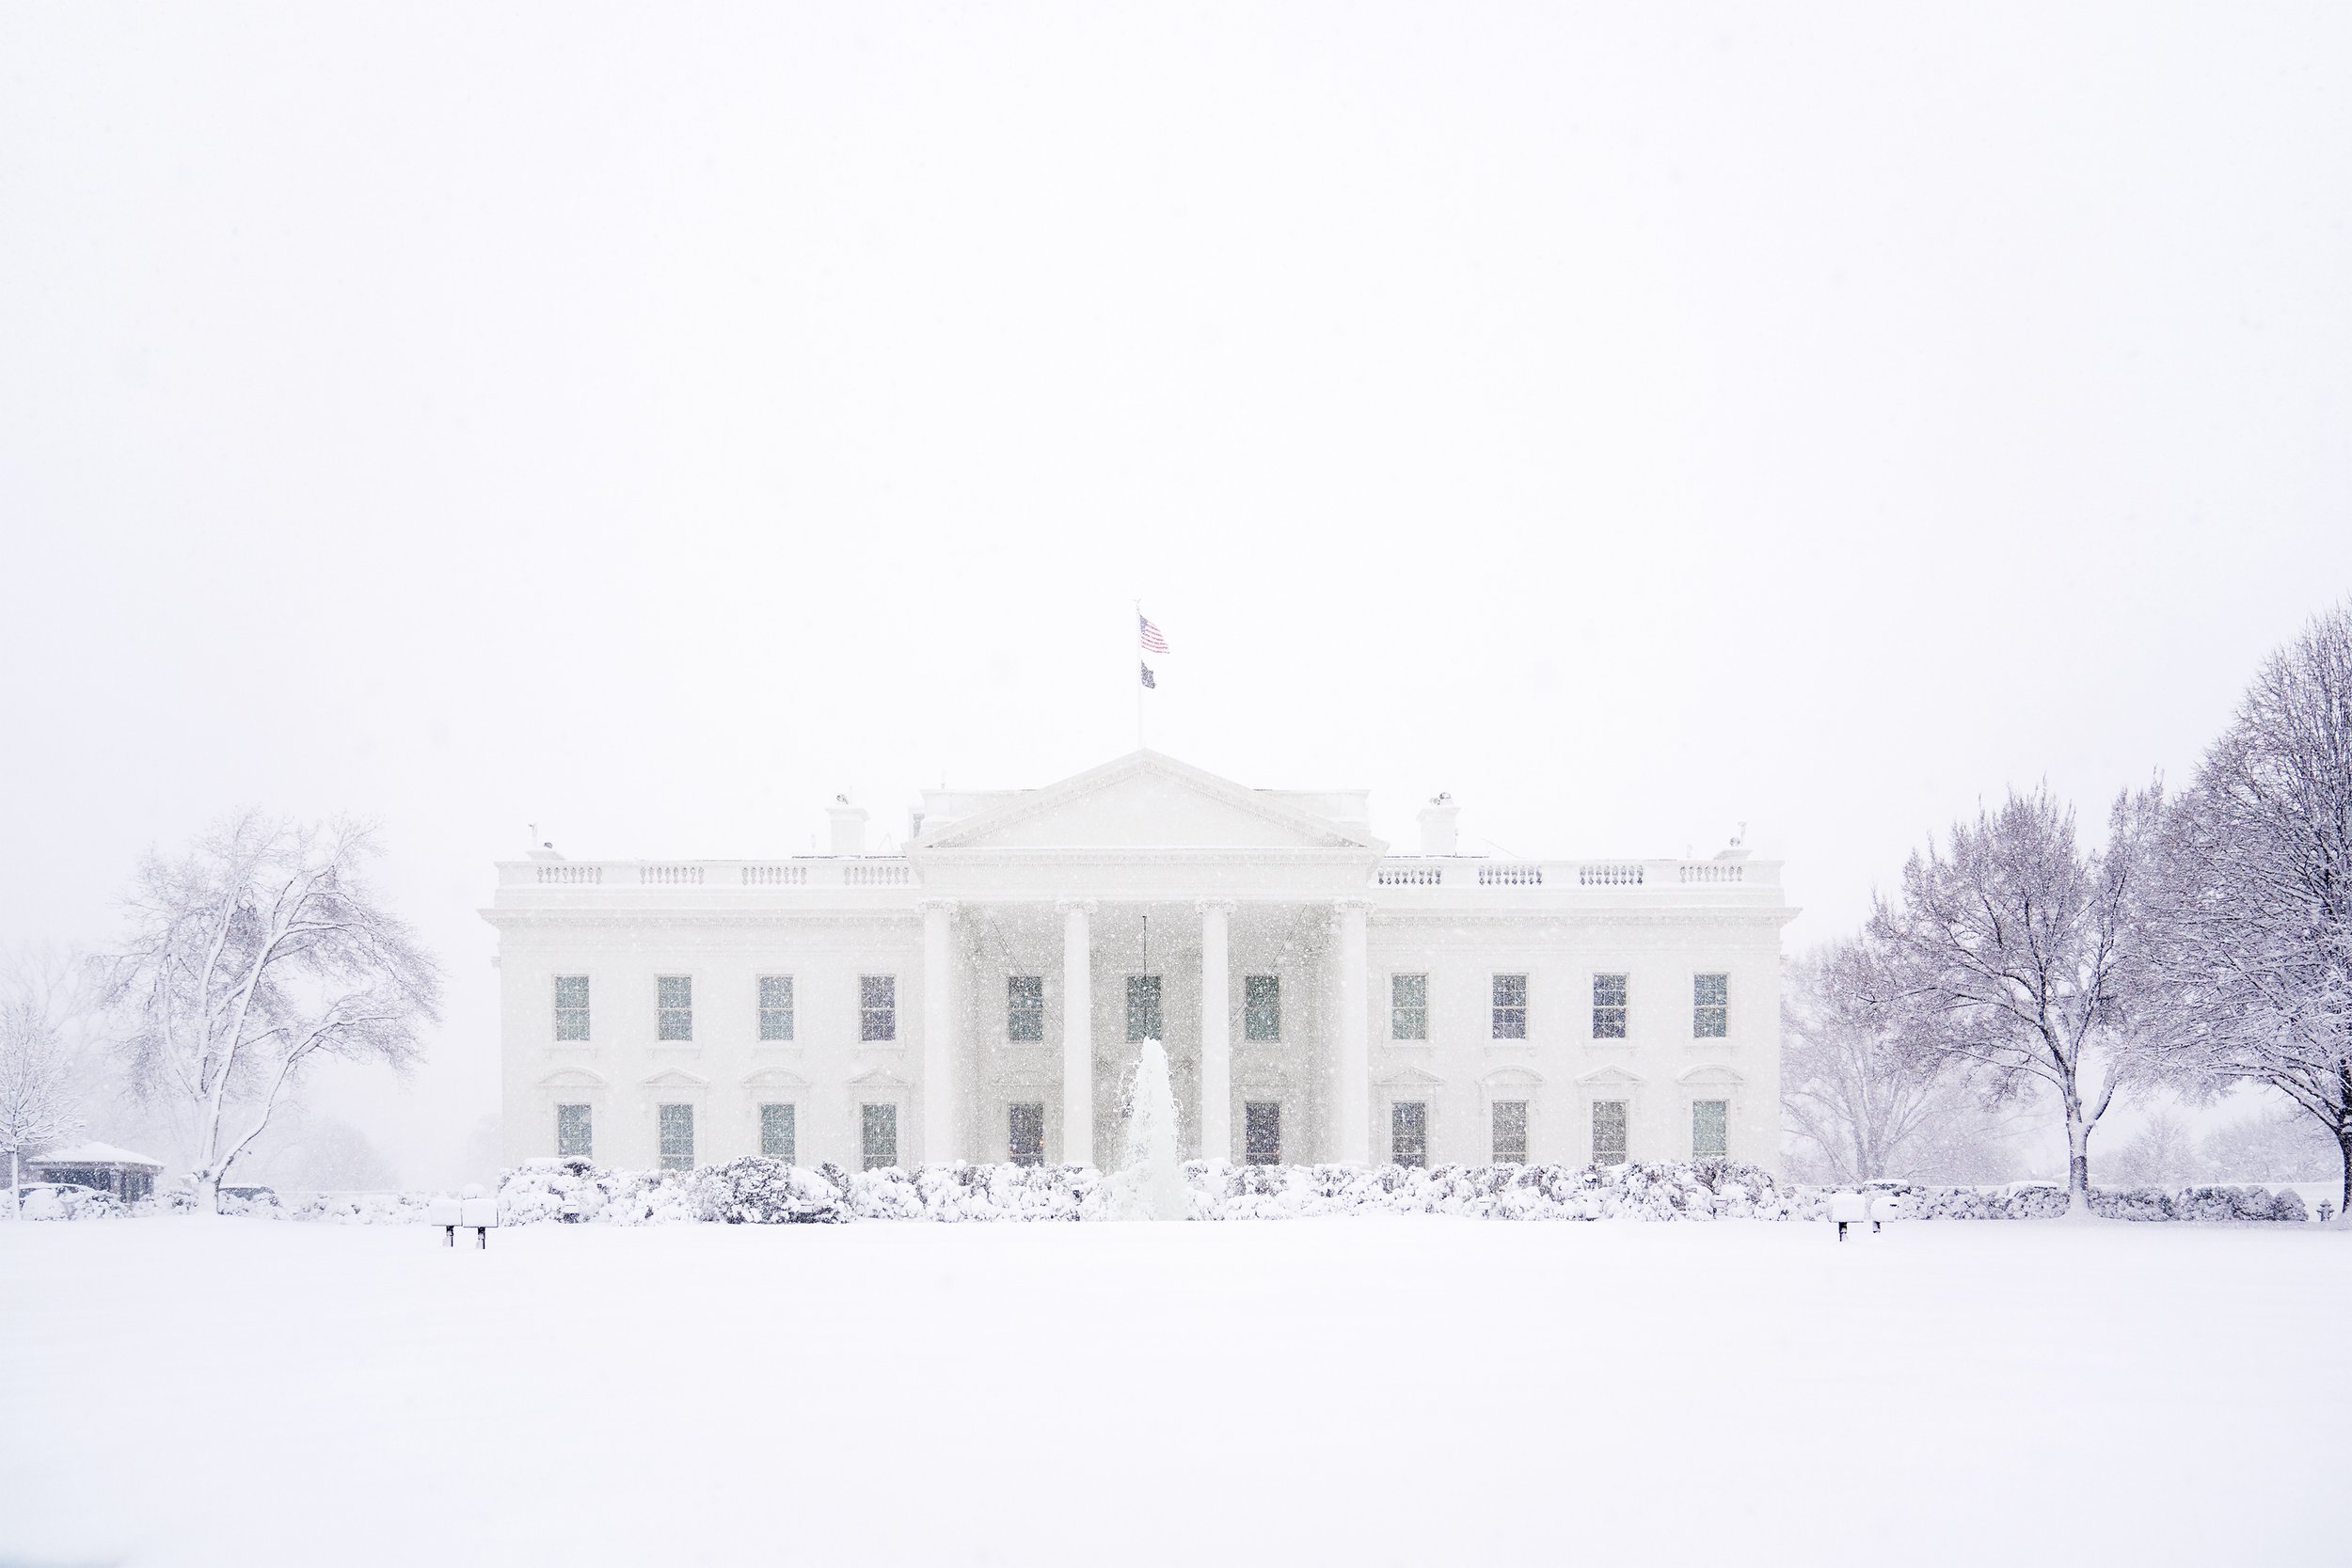  The White House during snow fall as the first Winter Storm passes through Washington DC. 